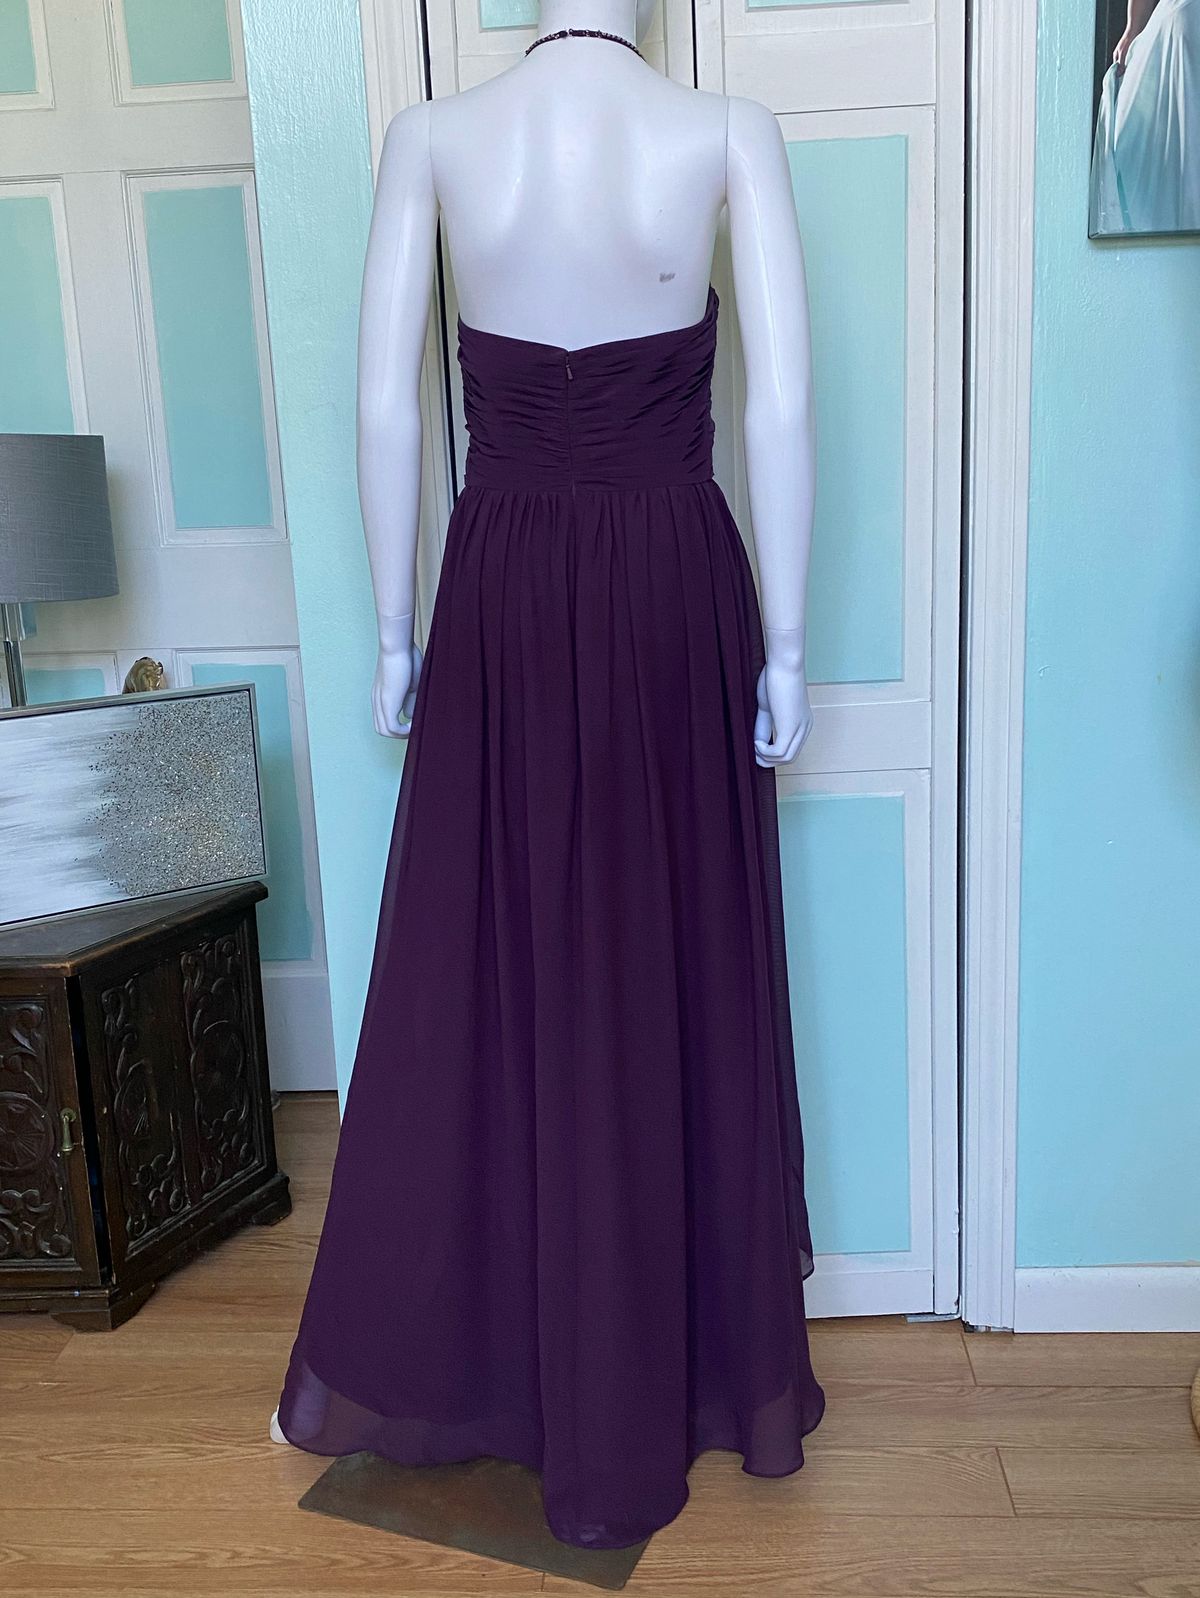 Sydney James Size 8 Prom Halter Purple A-line Dress on Queenly